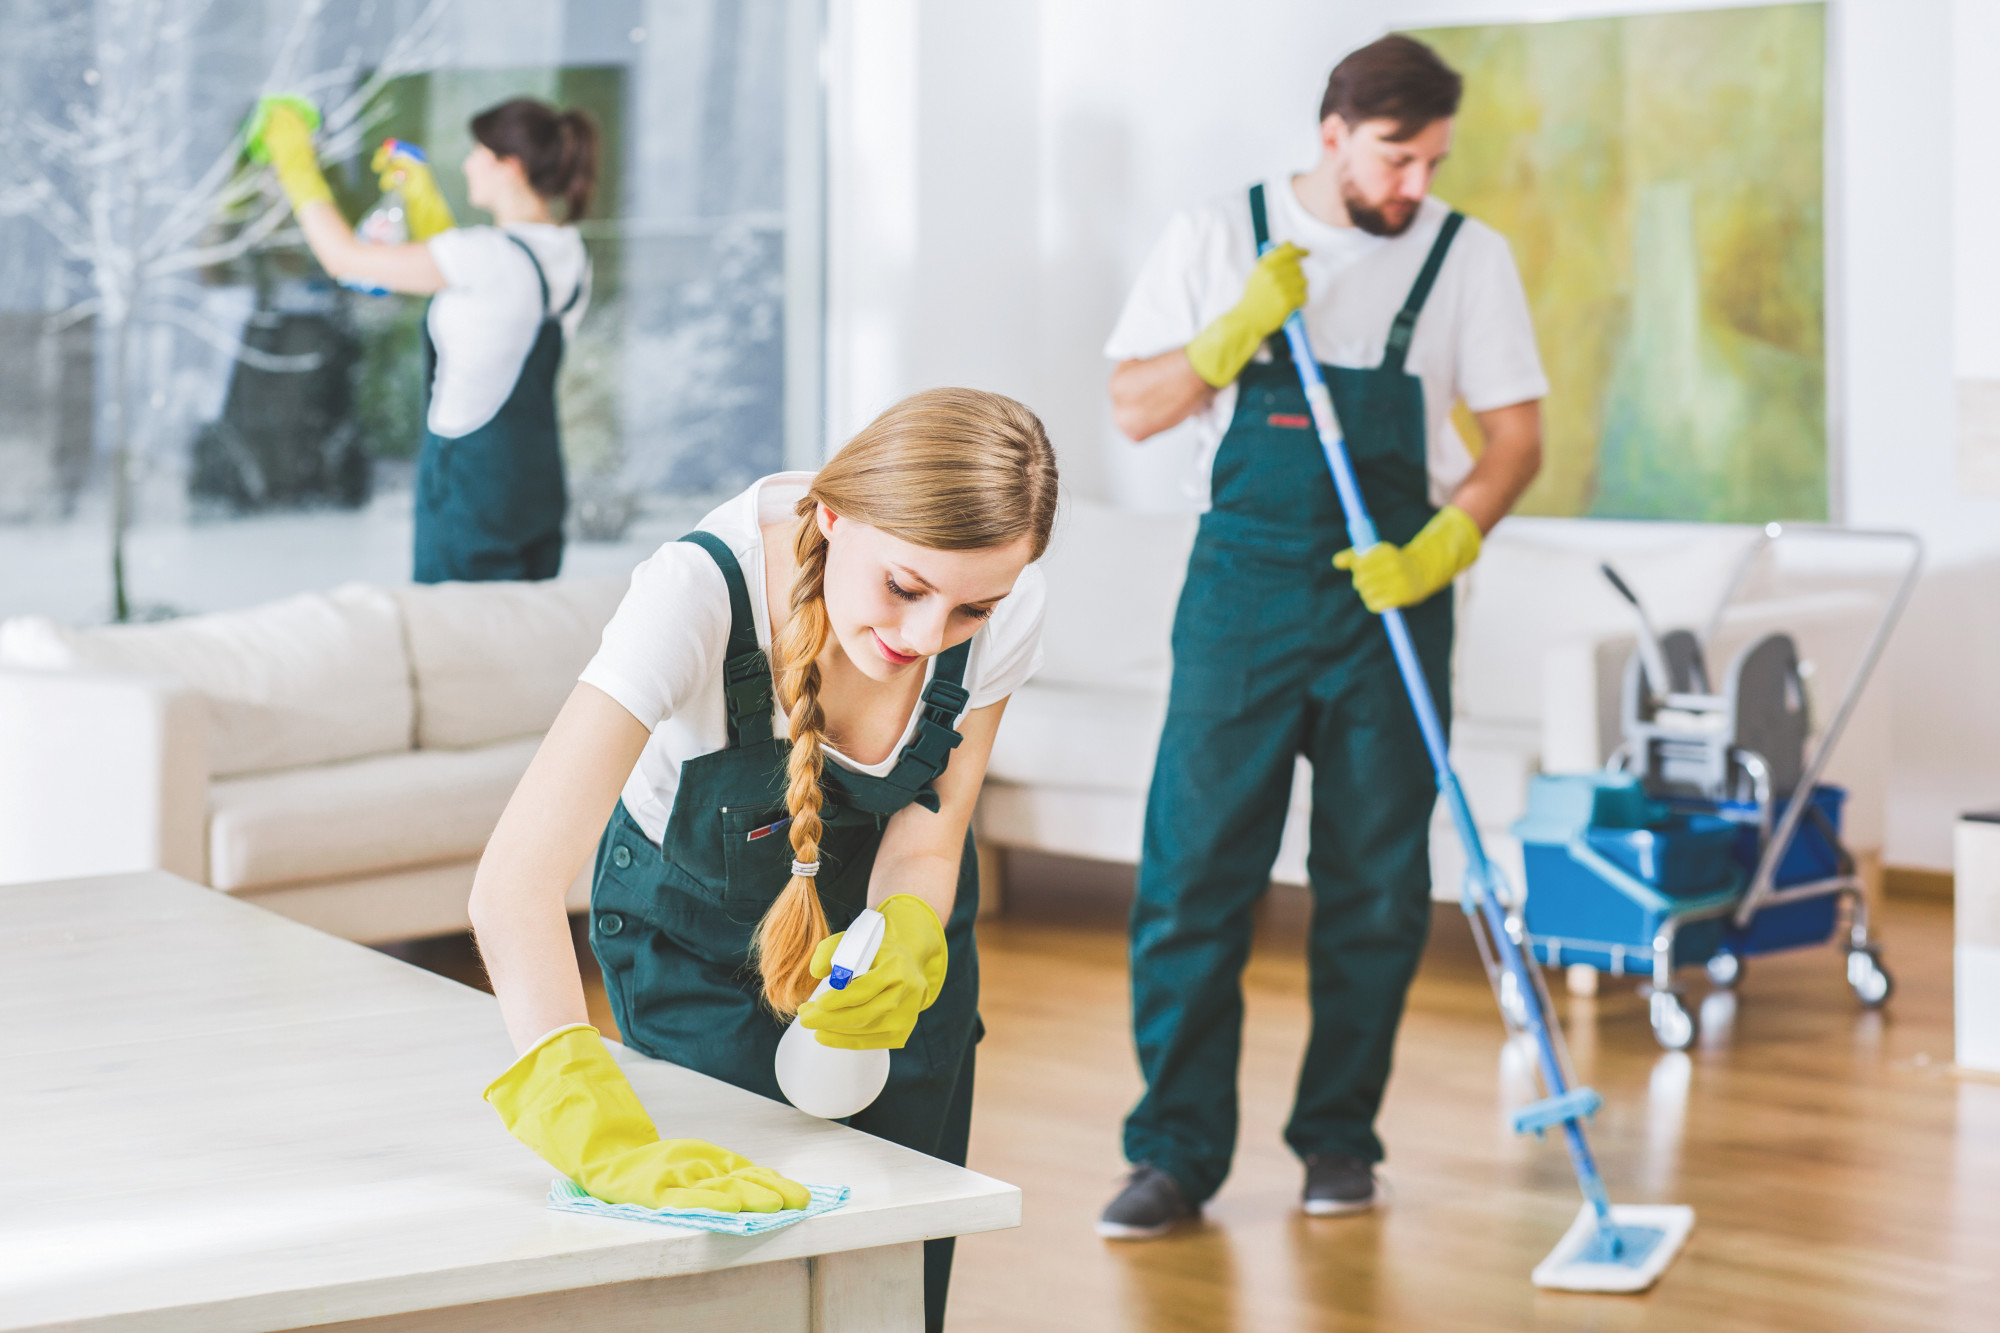 https://ecoglowcleaning.com/wp-content/uploads/2022/11/Cleaning-service-employees-wit.jpg